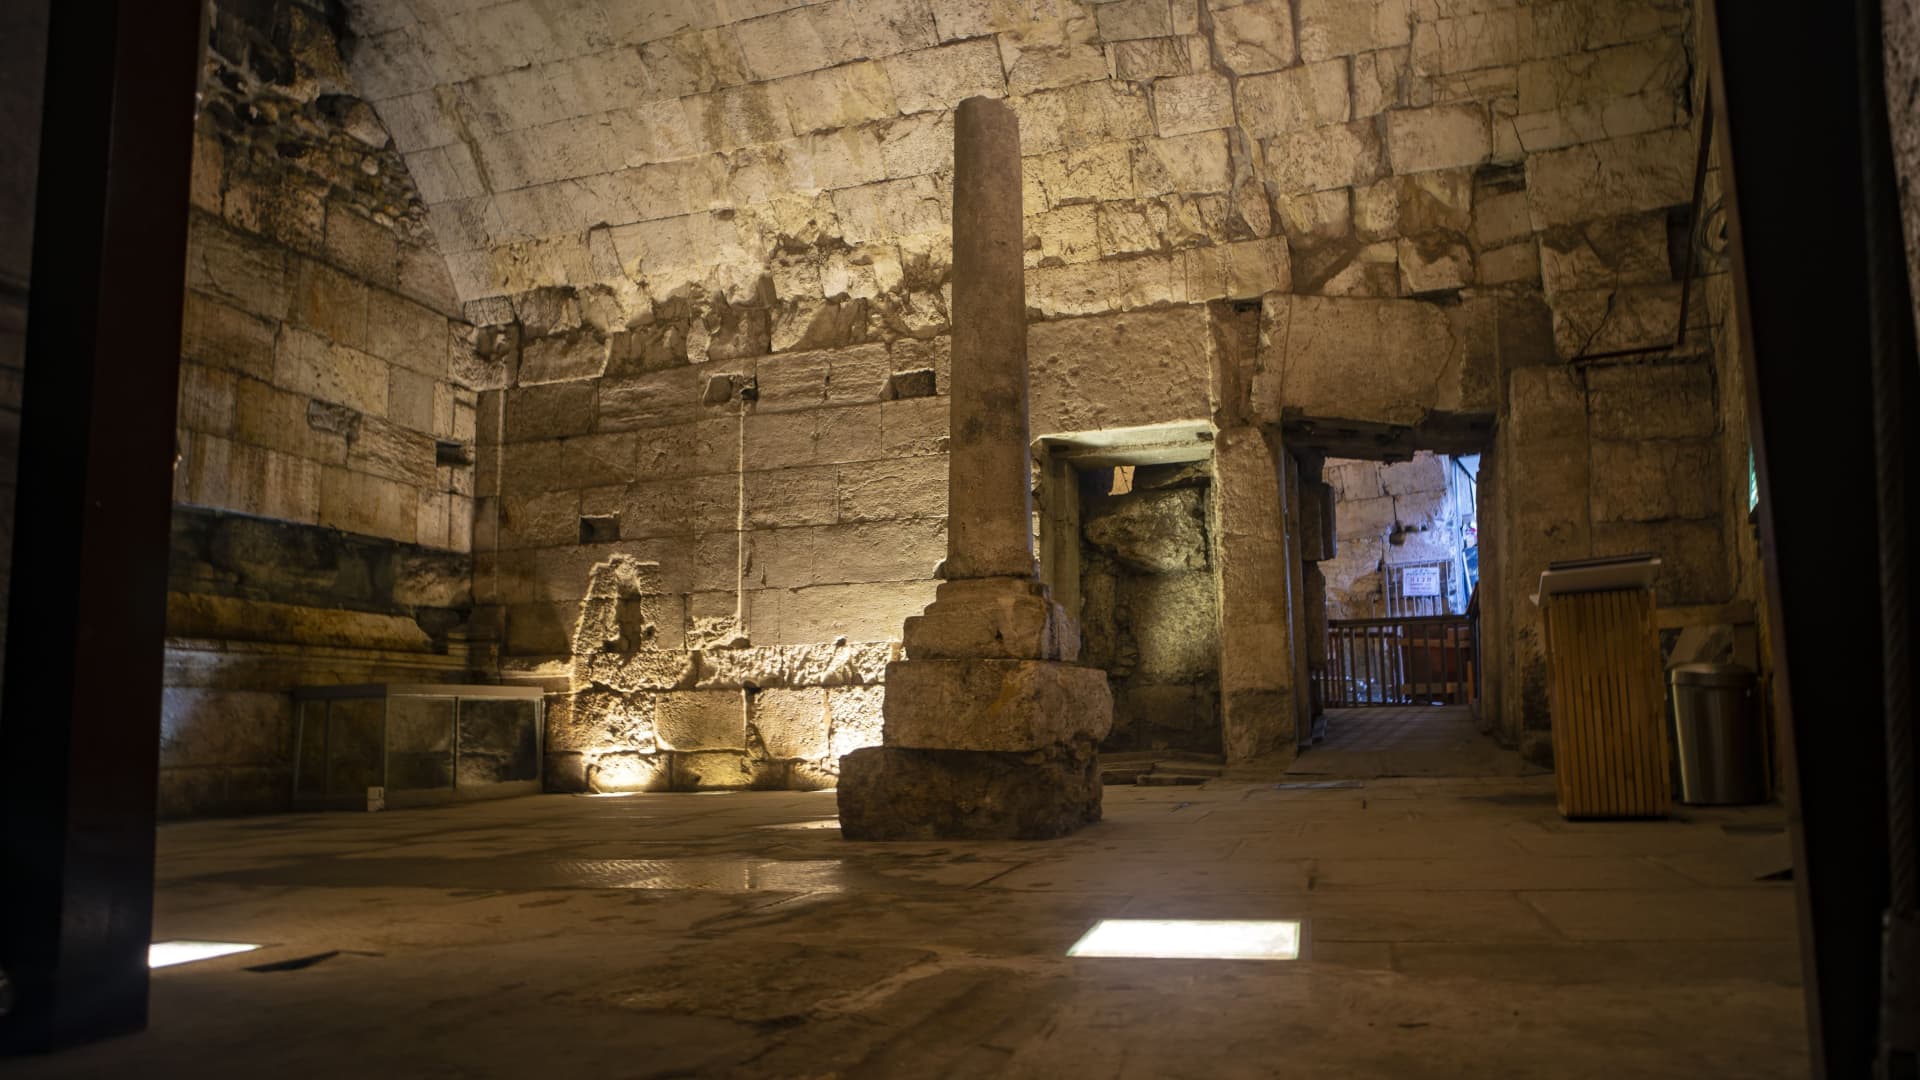 One of two chambers of a building discovered outside the Western Wall.